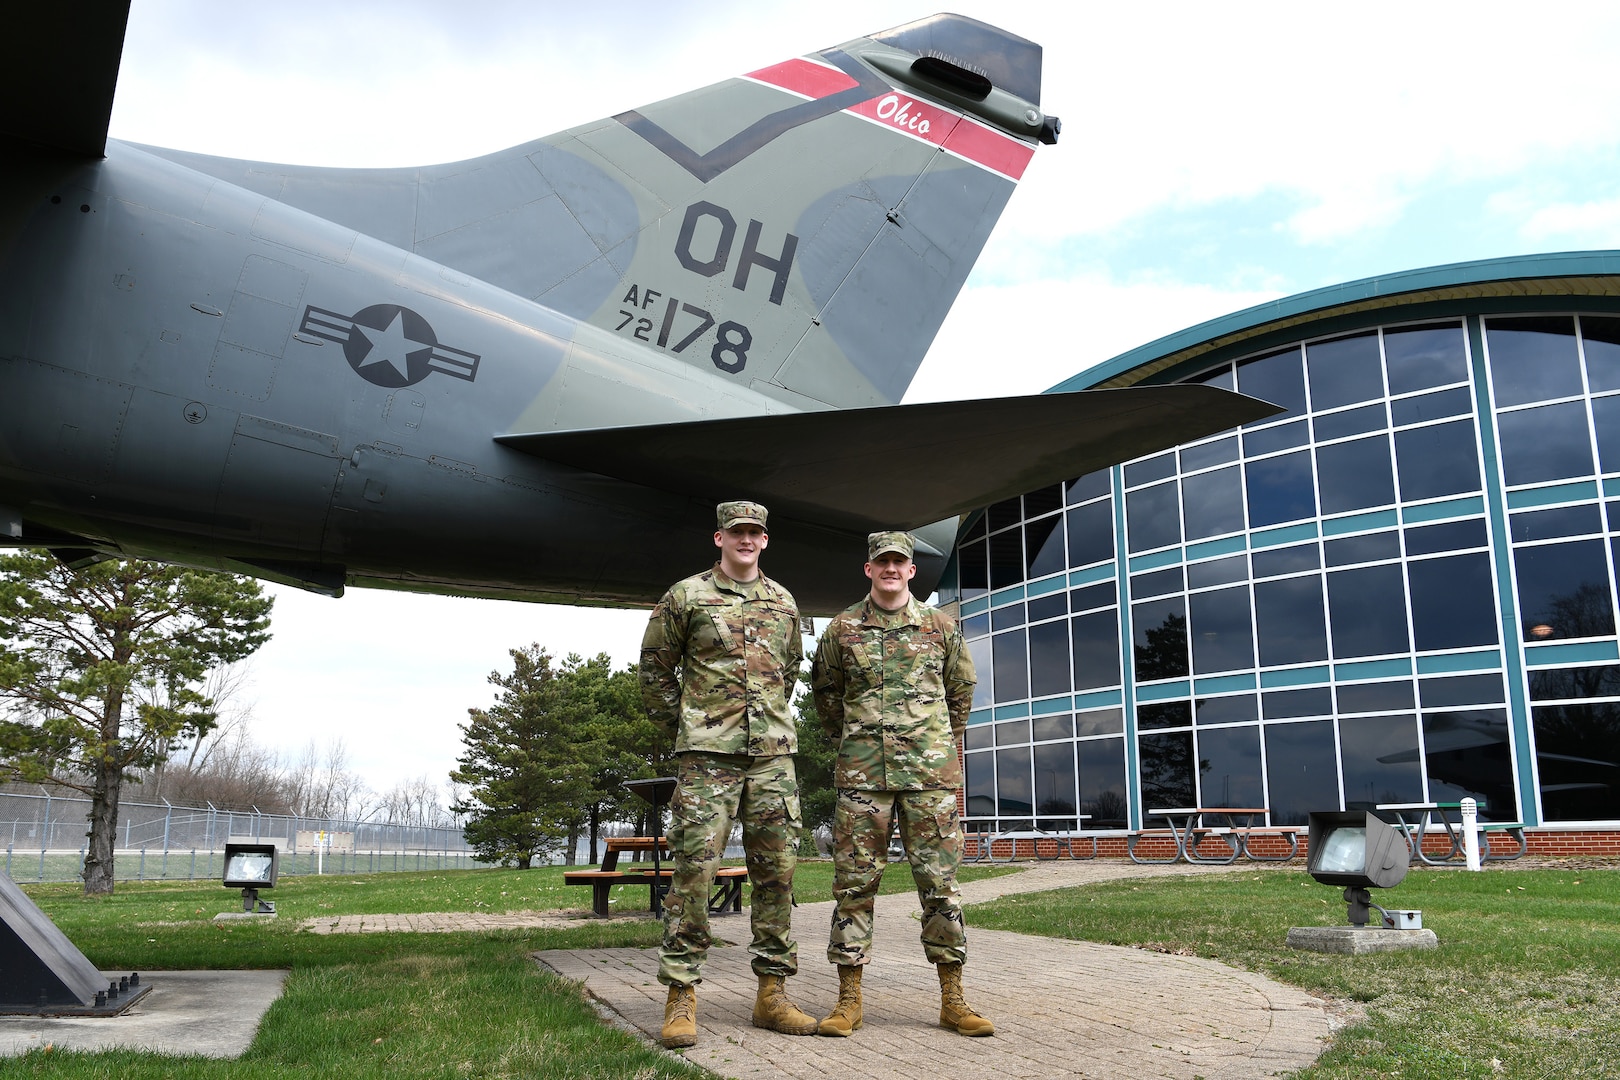 Second lieutenant Josh Crum, the 178th Communications flight quality assurance officer in charge, and Senior Master Sgt. Justin Crum, the 178th Wing plans branch superintendent serve together at Springfield-Beckley Air National Guard Base in Springfield, Ohio. The Crum brothers support one another and compete with each other to become the best in their career field.